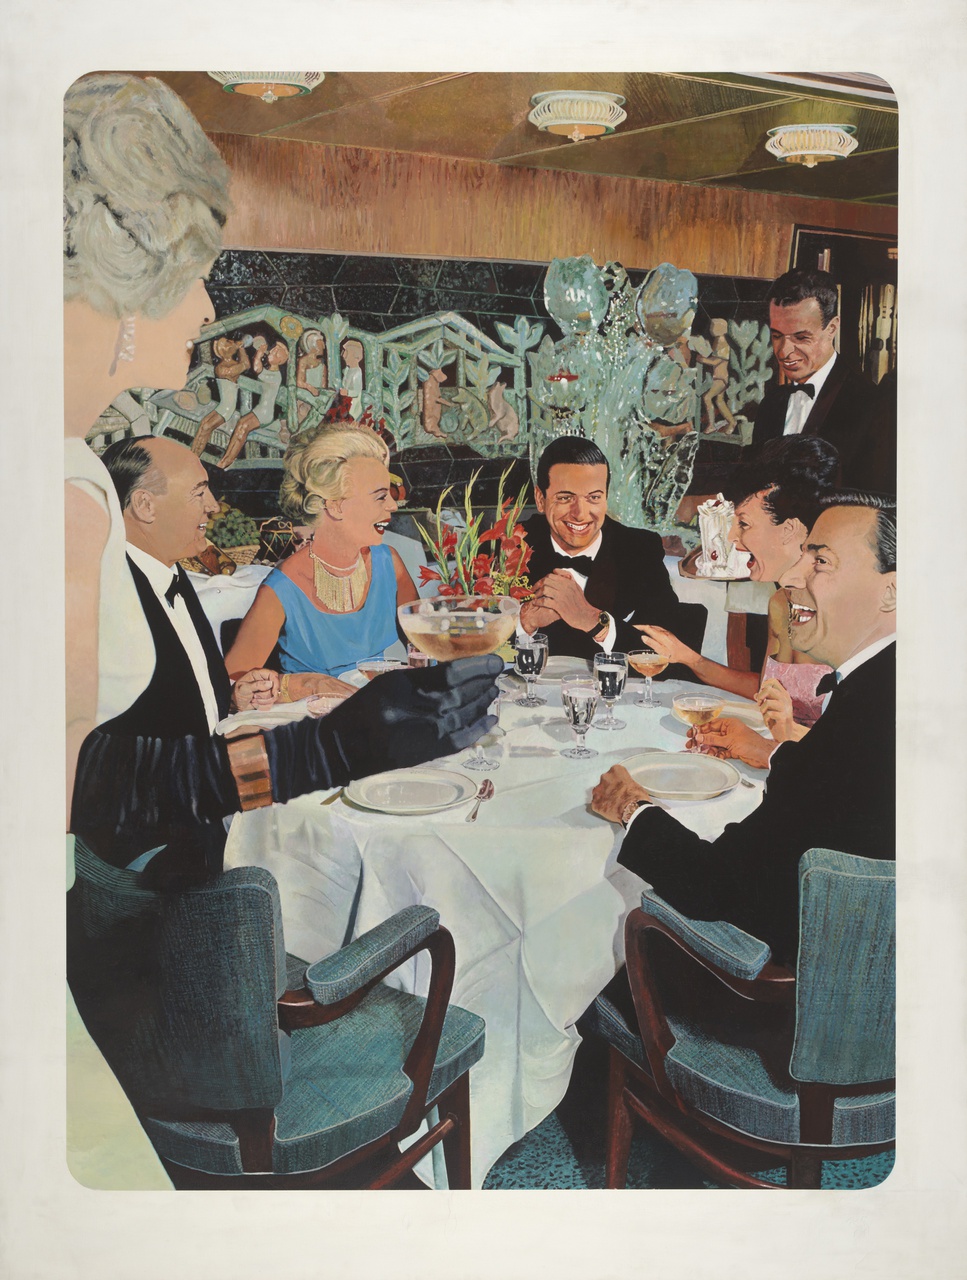 9/12 - Malcolm Morley, Ship’s Dinner Party, 1966, Collectie Centraal Museum